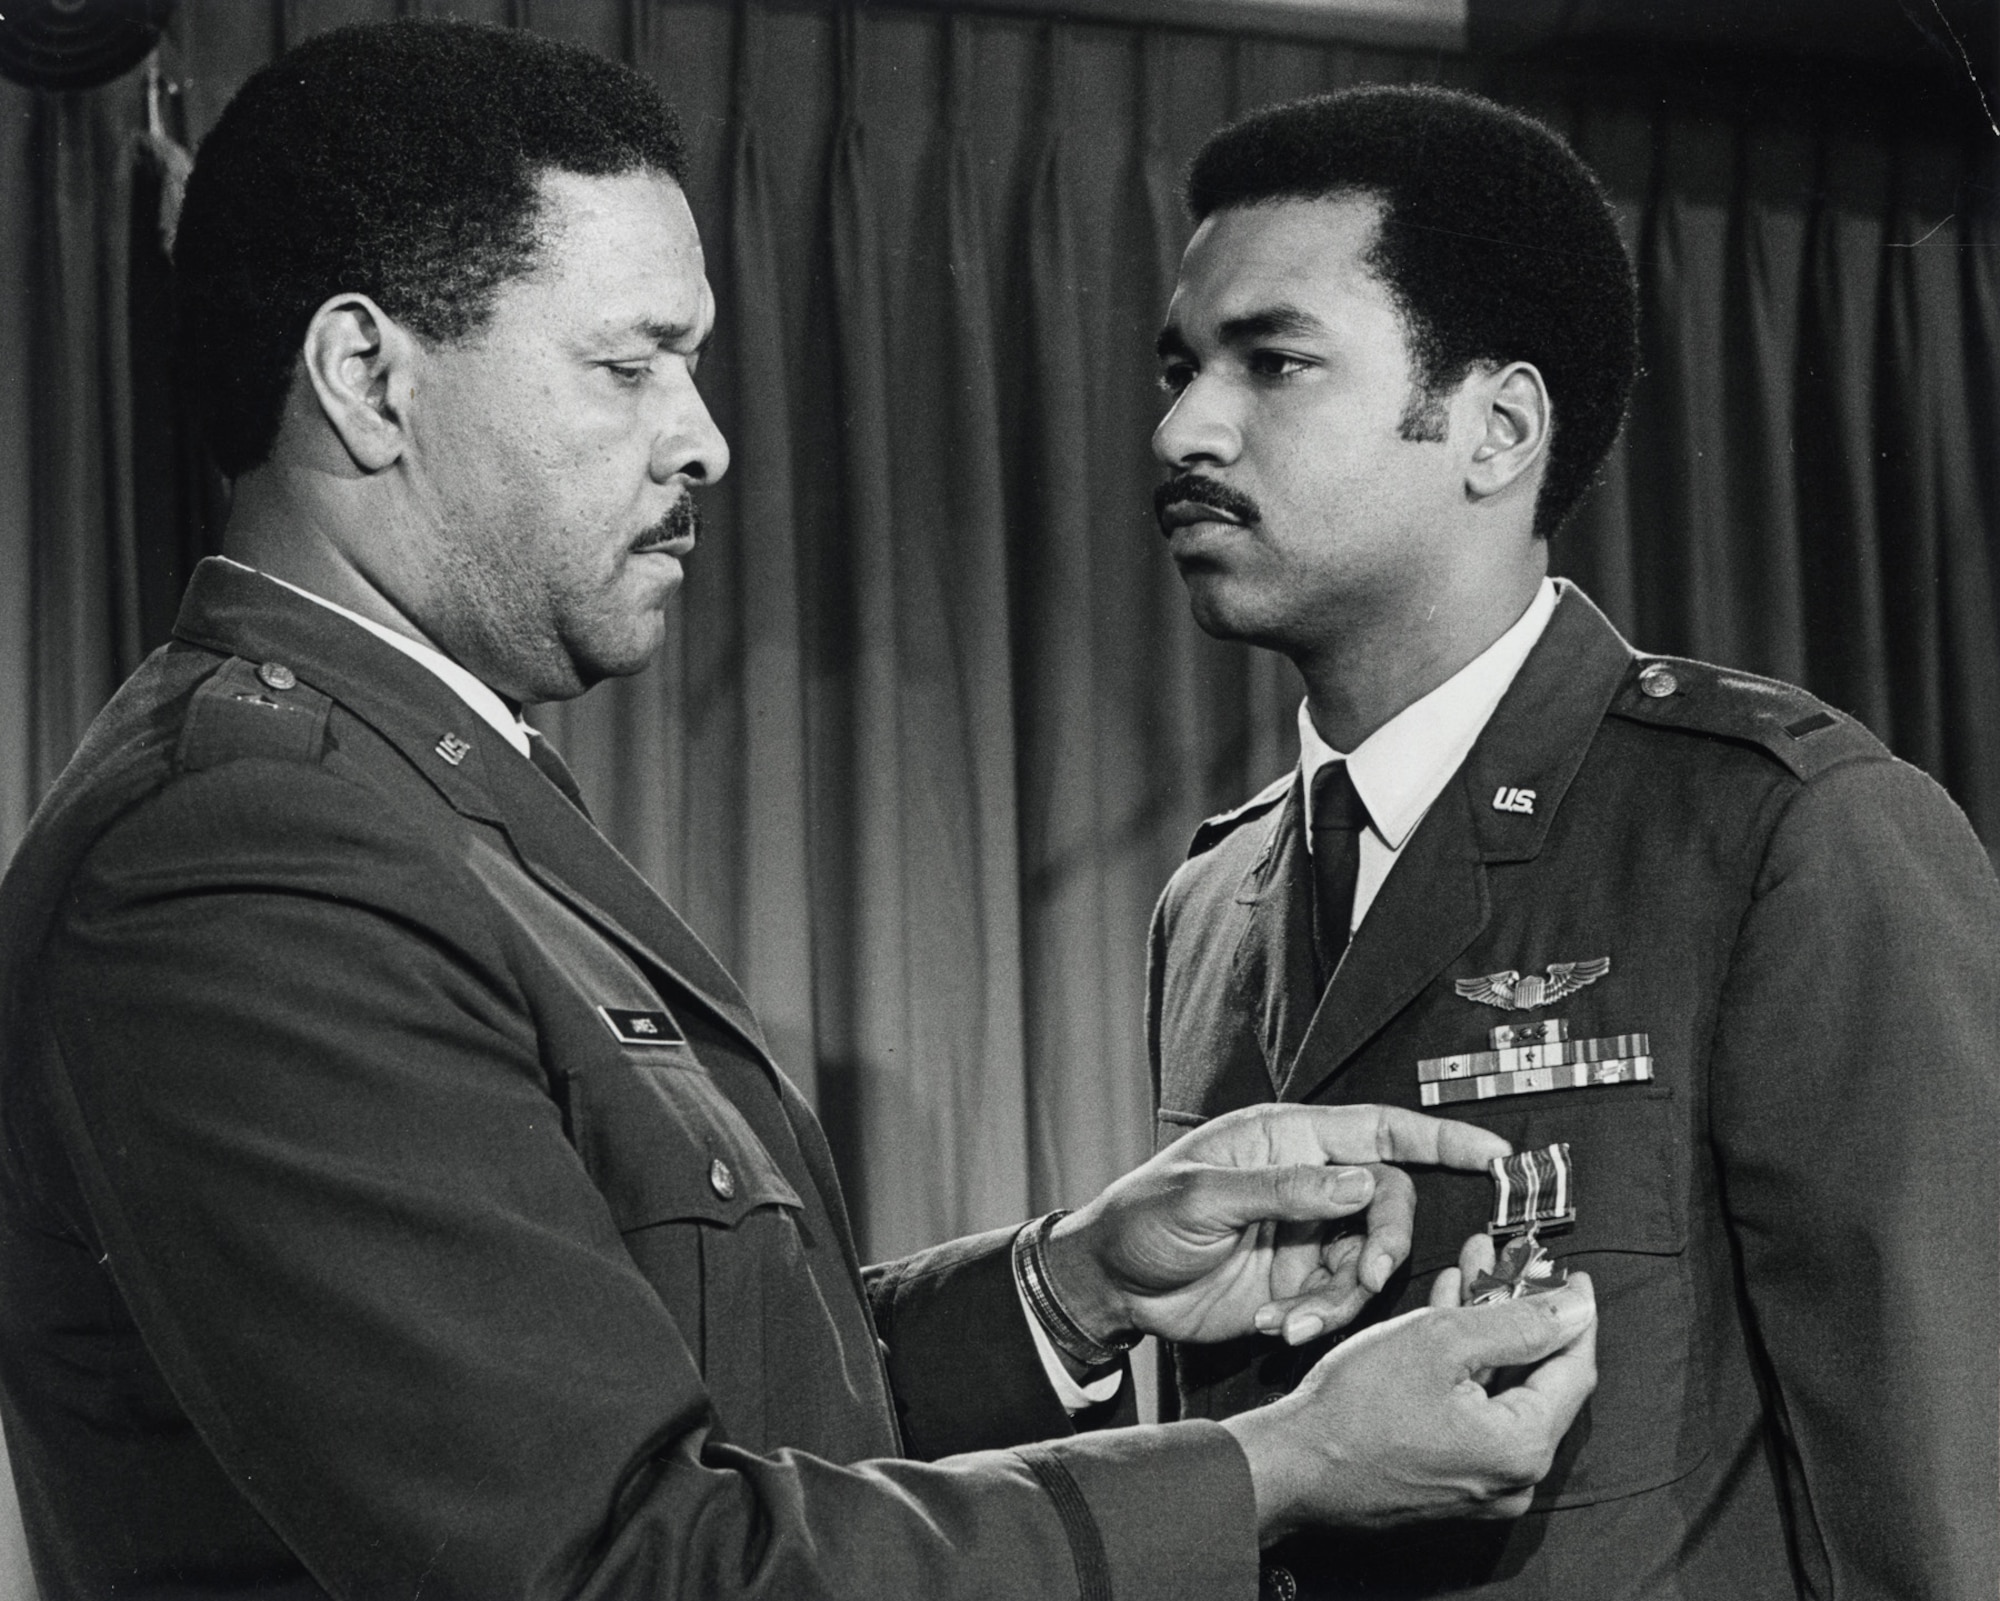 Lt. Daniel James III receives the first of his two Distinguished Flying Crosses from his father, Brig. Gen. Daniel "Chappie" James Jr. The younger James served two combat tours in Southeast Asia. (U.S. Air Force photo)